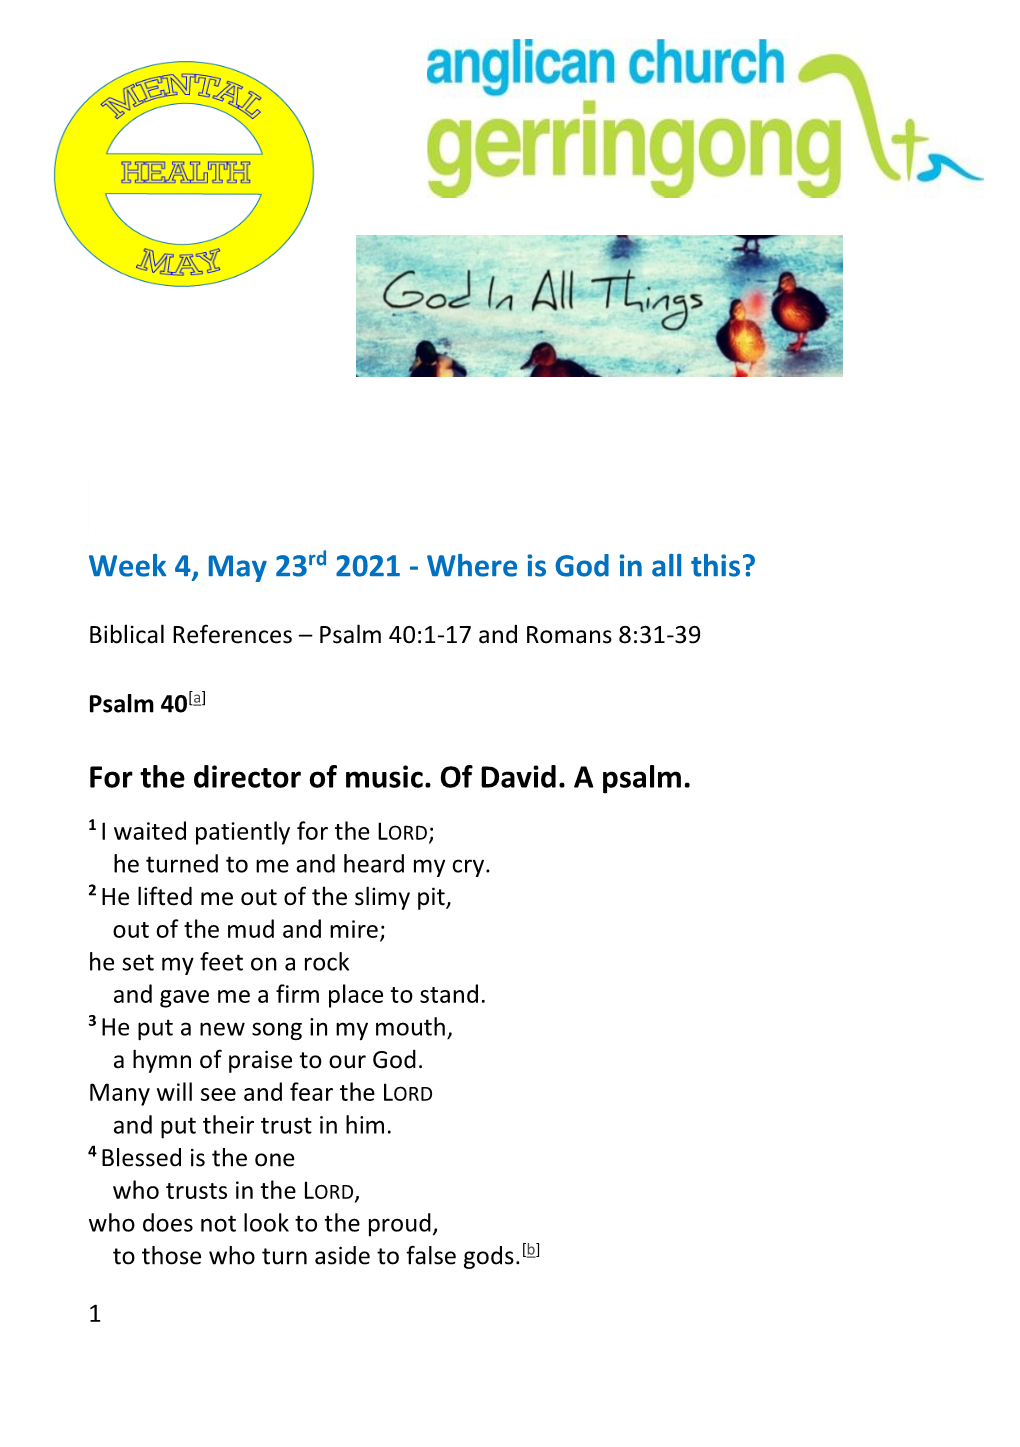 Week 4, May 23Rd 2021 - Where Is God in All This?